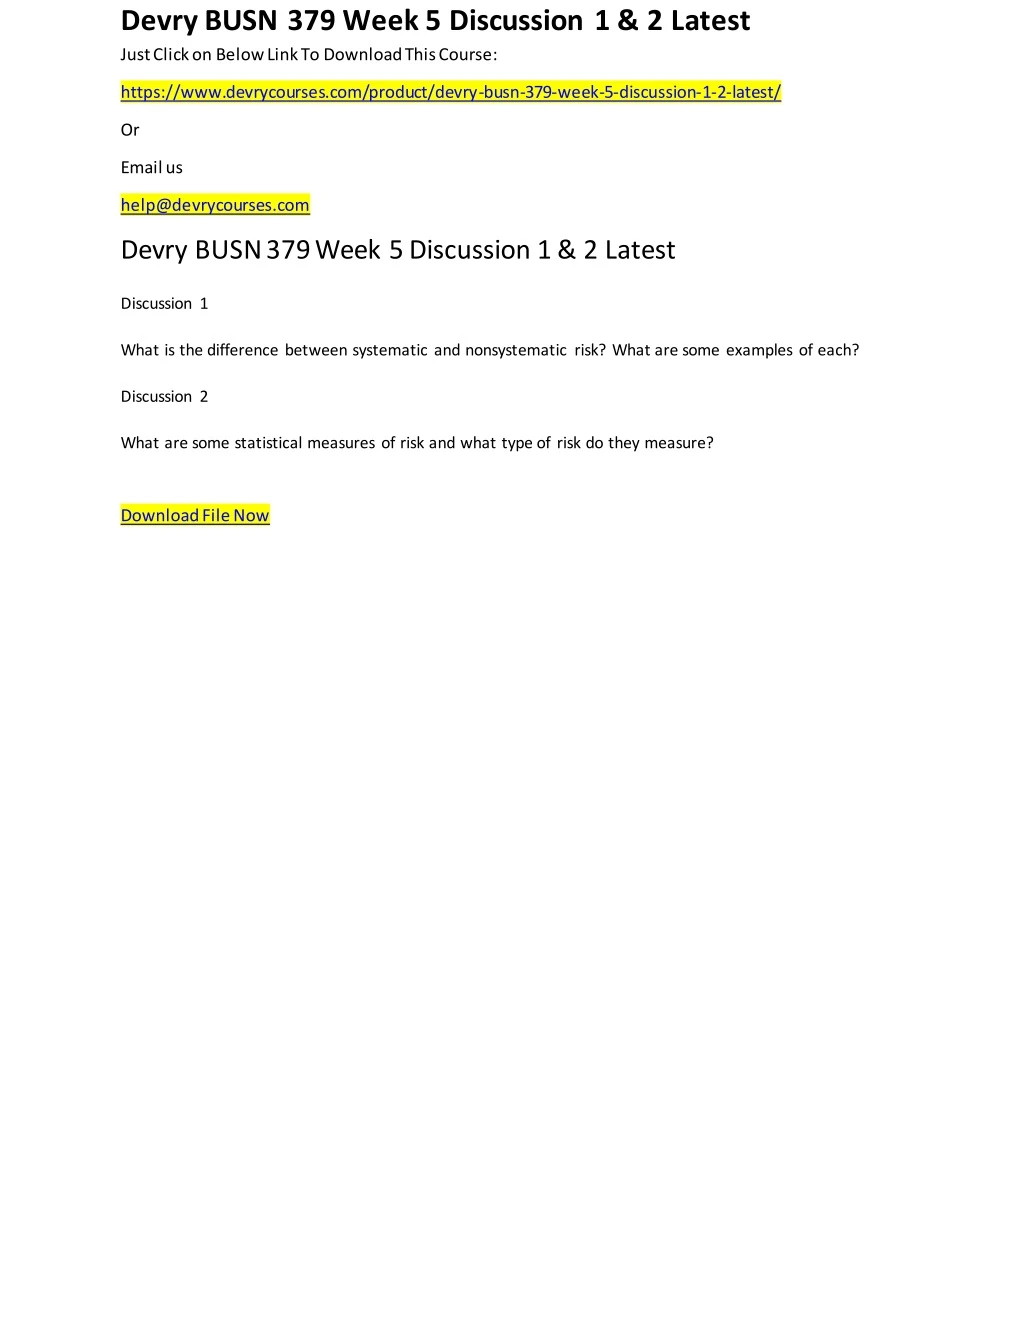 devry busn 379 week 5 discussion 1 2 latest just